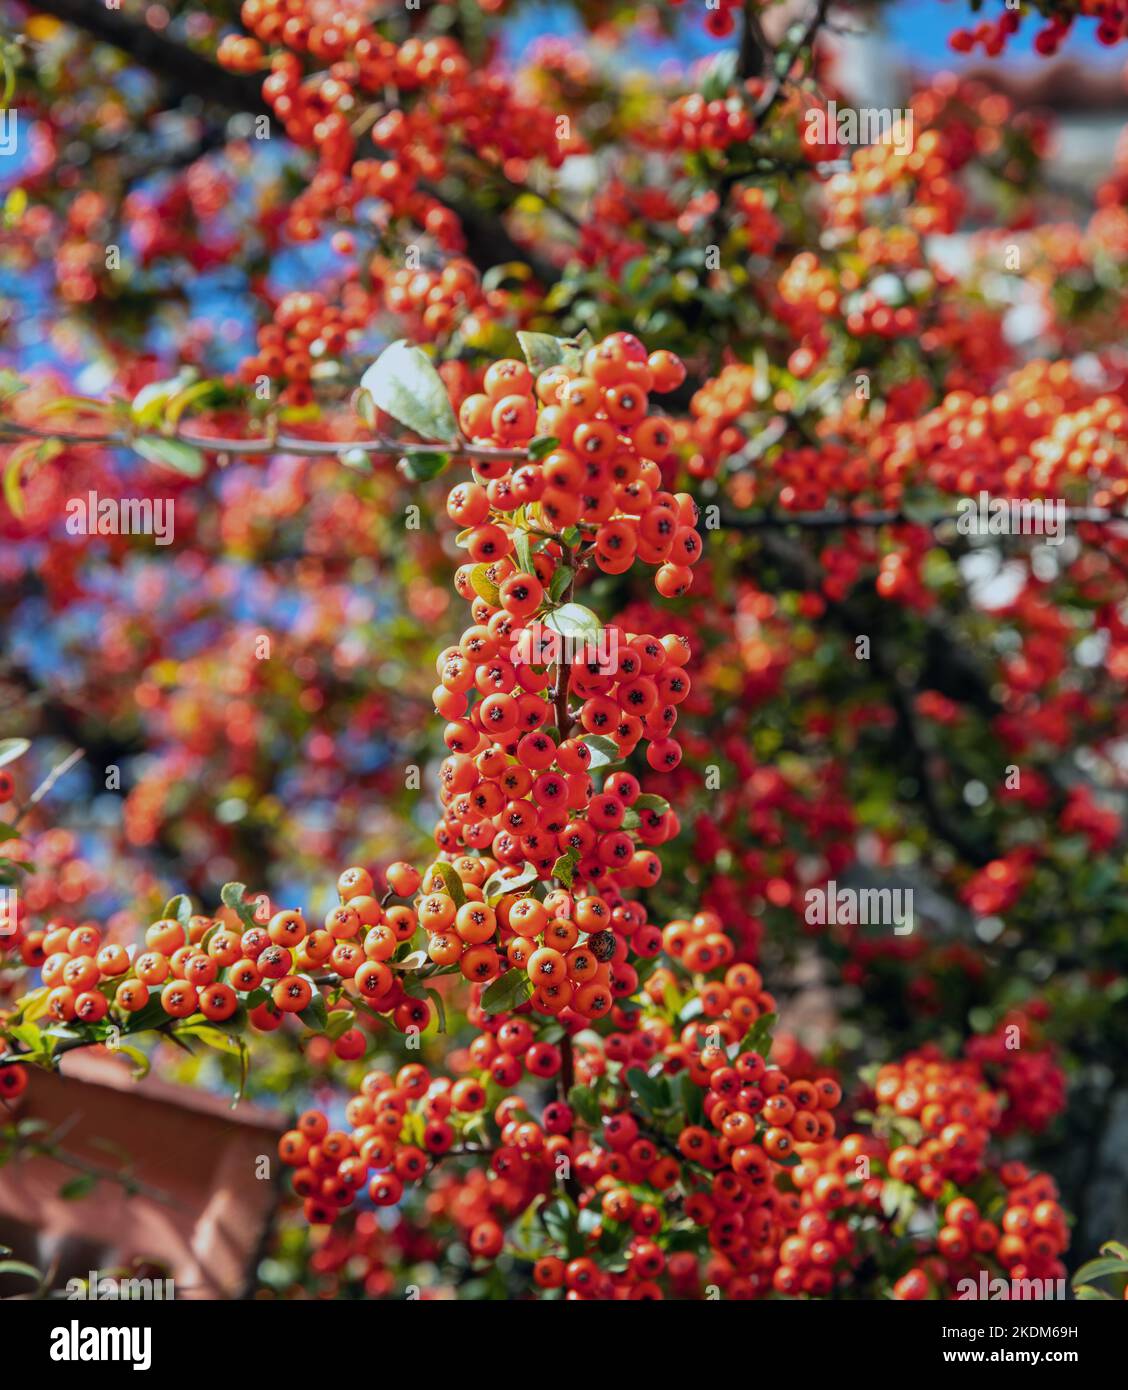 Pyracantha Firethorn shrub background. Evergreen plant with bright red berry like pomes and green foliage. Close up vertical view Stock Photo